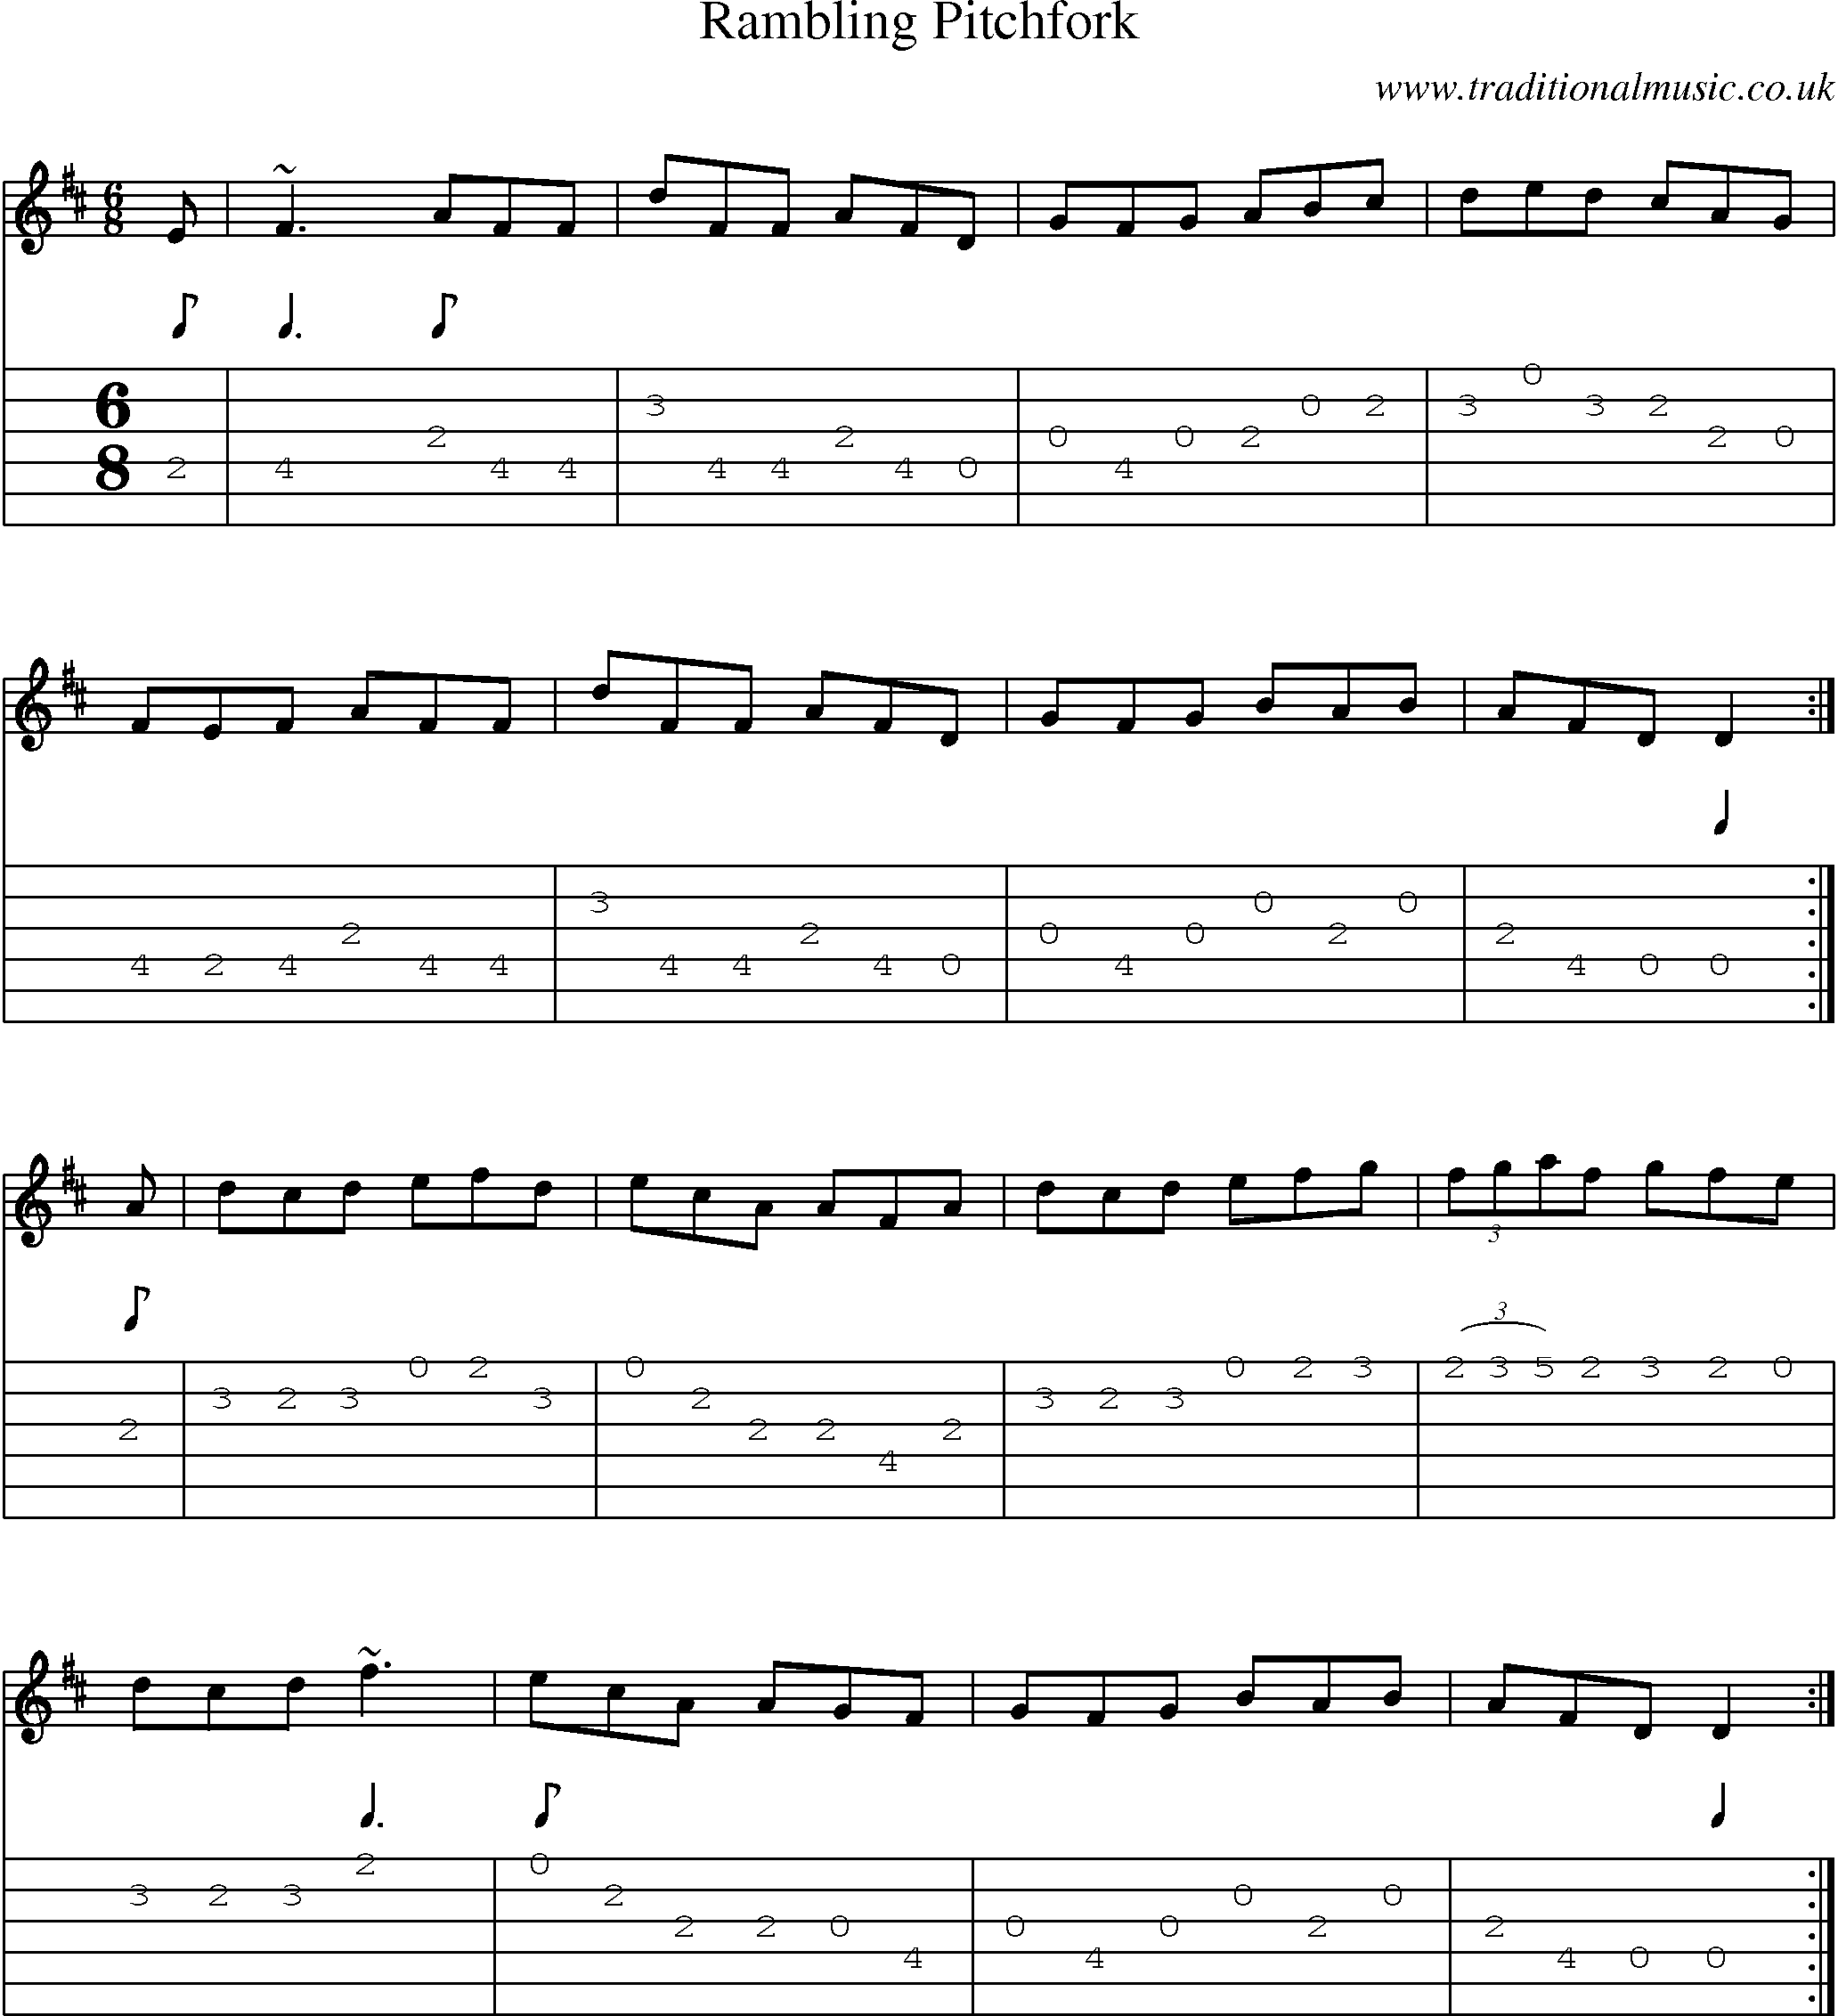 Music Score and Guitar Tabs for Rambling Pitchfork